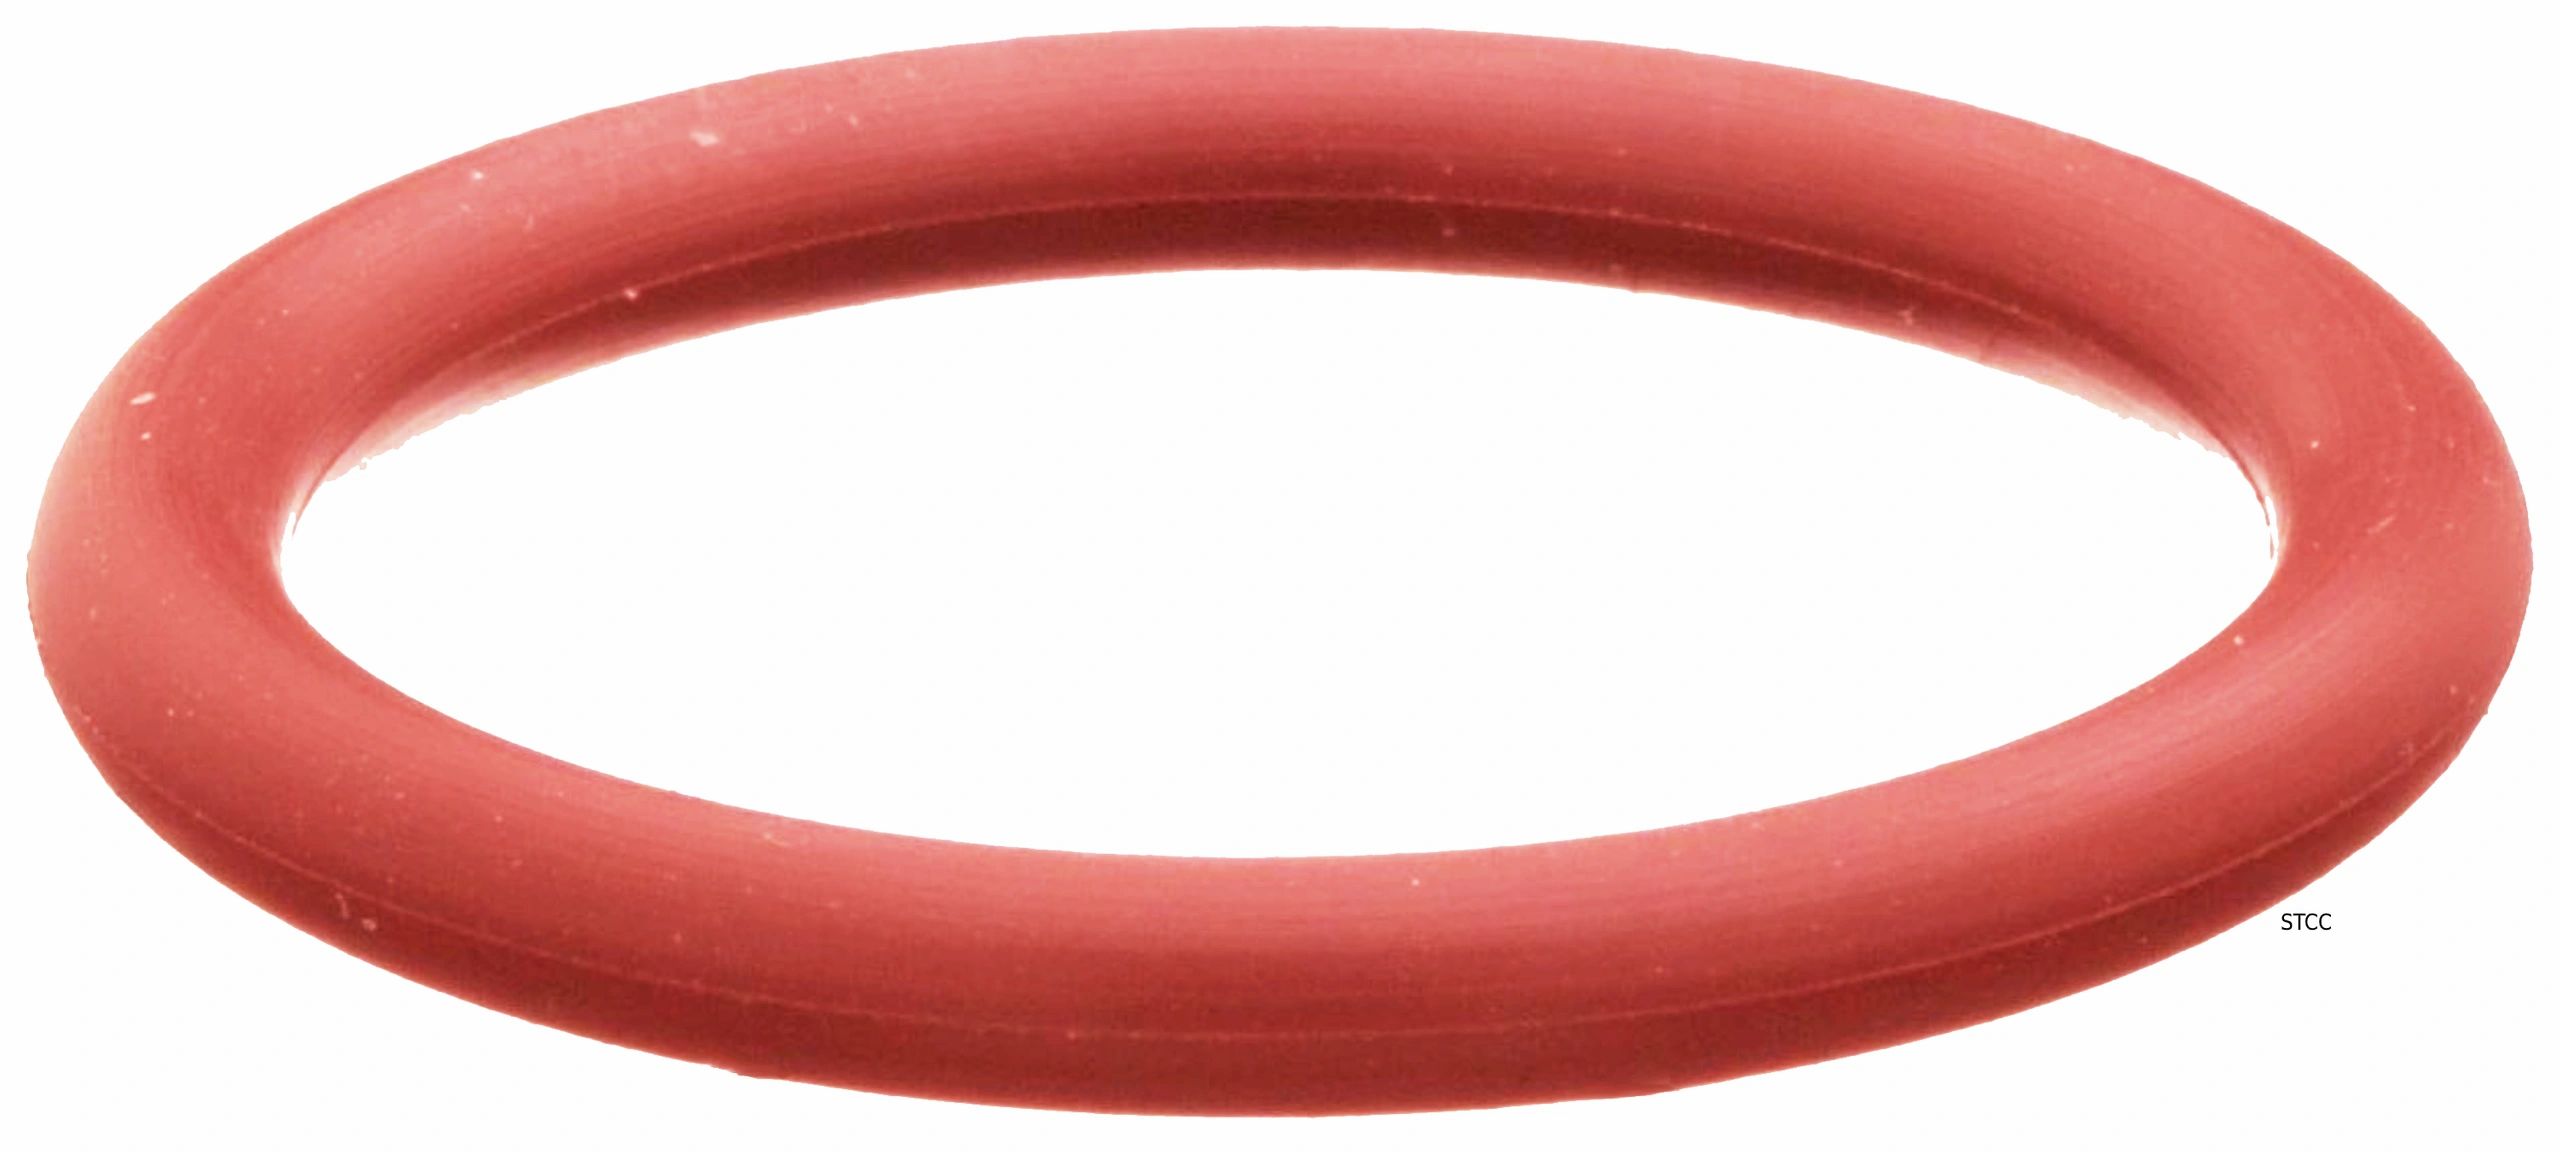 1/4 Width Red 9 OD 70A Durometer 8-1/2 ID Silicone 446 O-Ring 